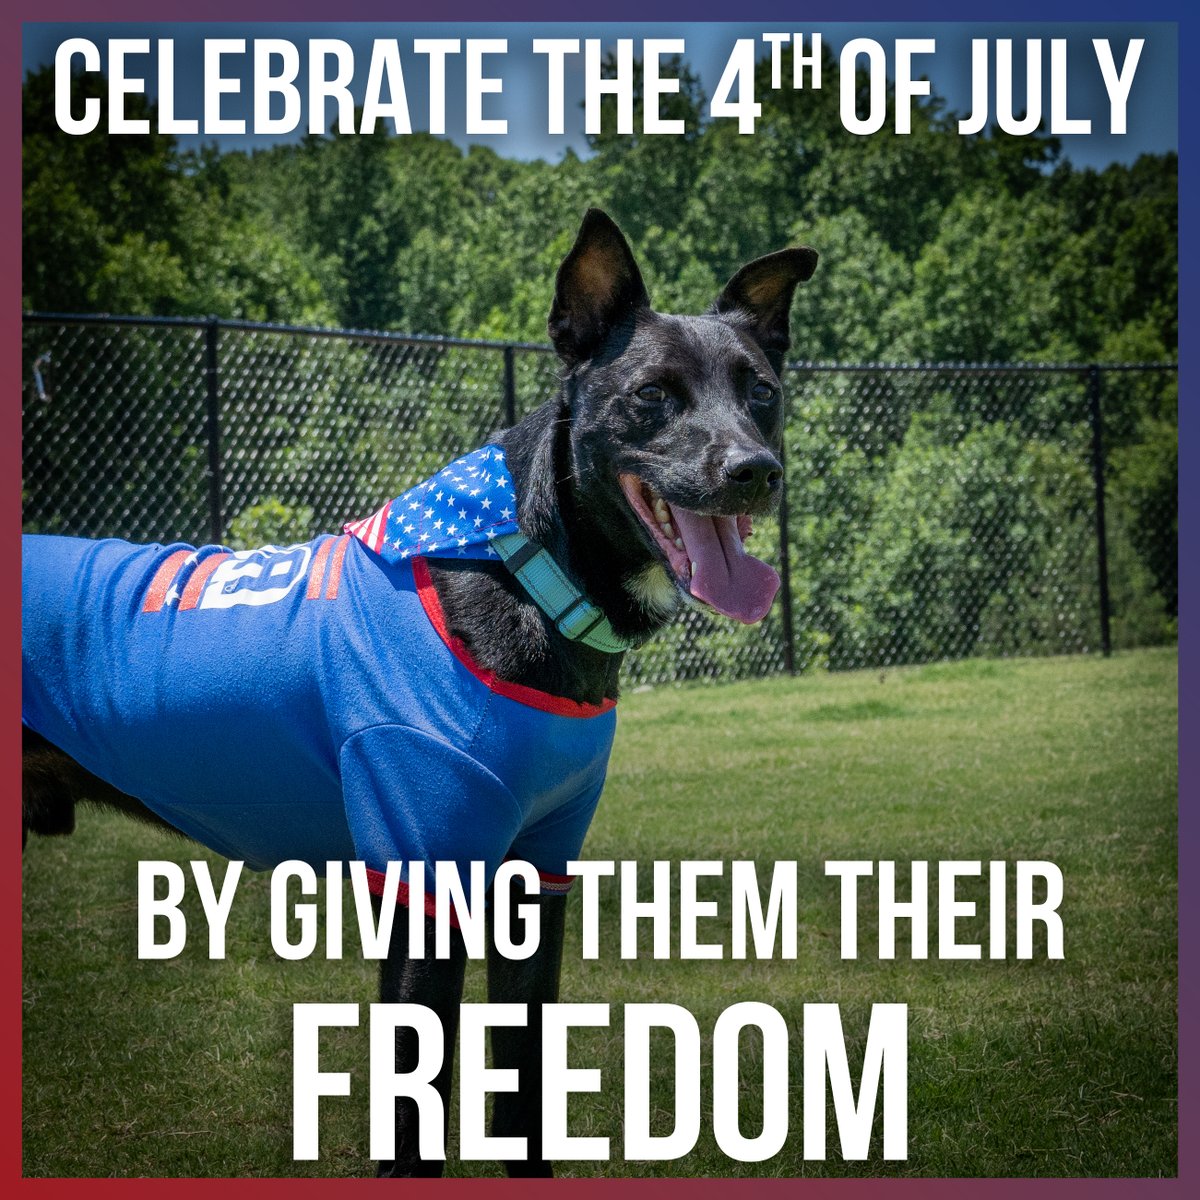 The 4th of July is almost here, and there's no better way to celebrate than by giving a shelter animal their freedom! Come adopt or foster at Anderson County PAWS! We're open M, T, Th, F & Sat. 12 - 5!

#AndersonCountyPAWS #4thOfJuly #Freedom #adopt #foster #rescue #adoptme